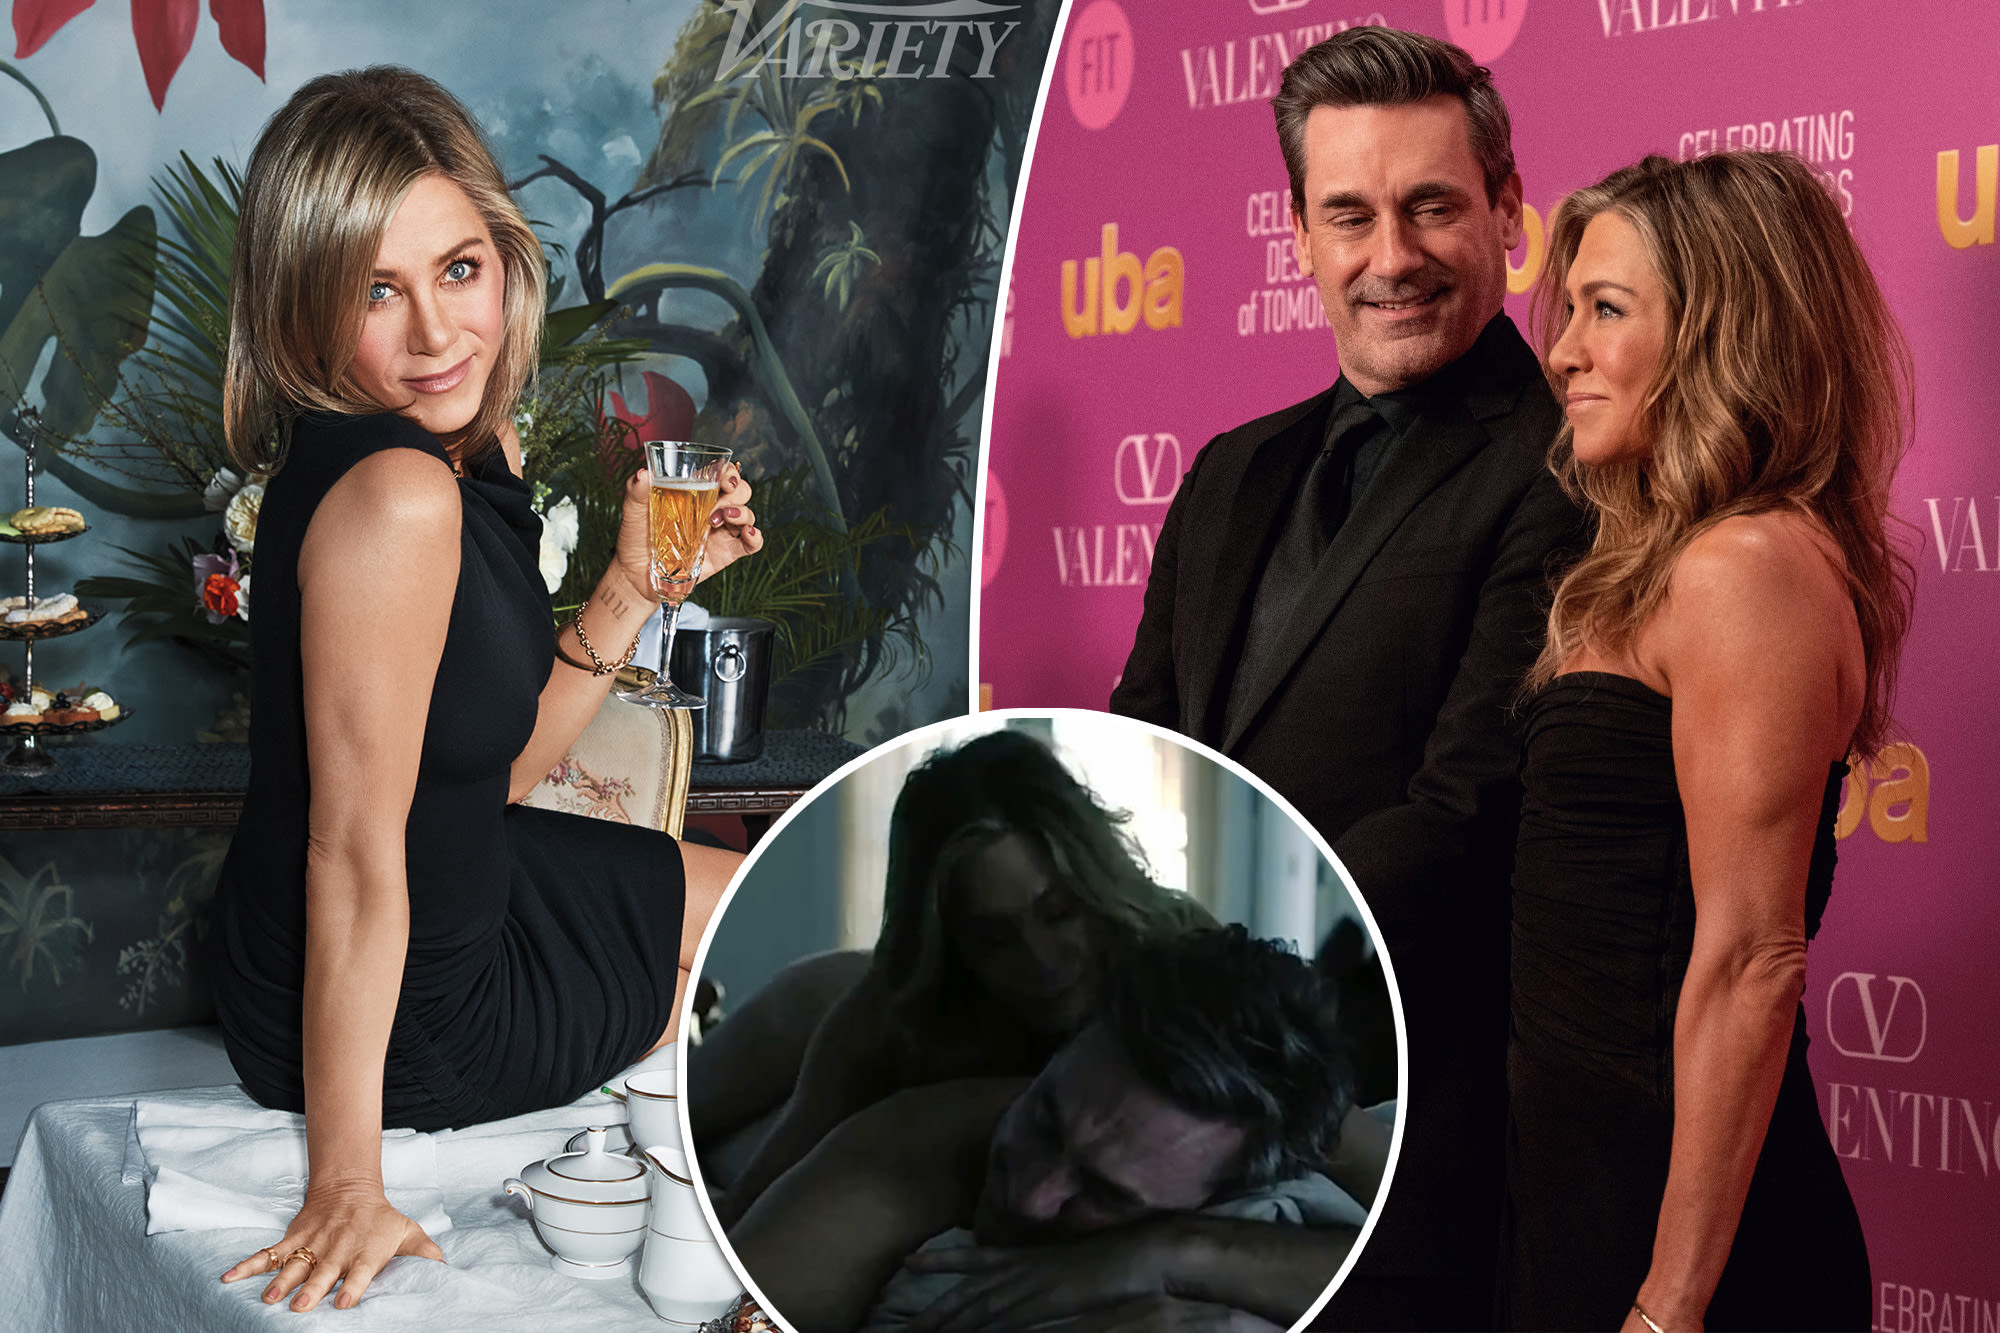 Jennifer Aniston gushes over Jon Hamm after ‘Morning Show’ sex scene: ‘Big, tall drink of water’